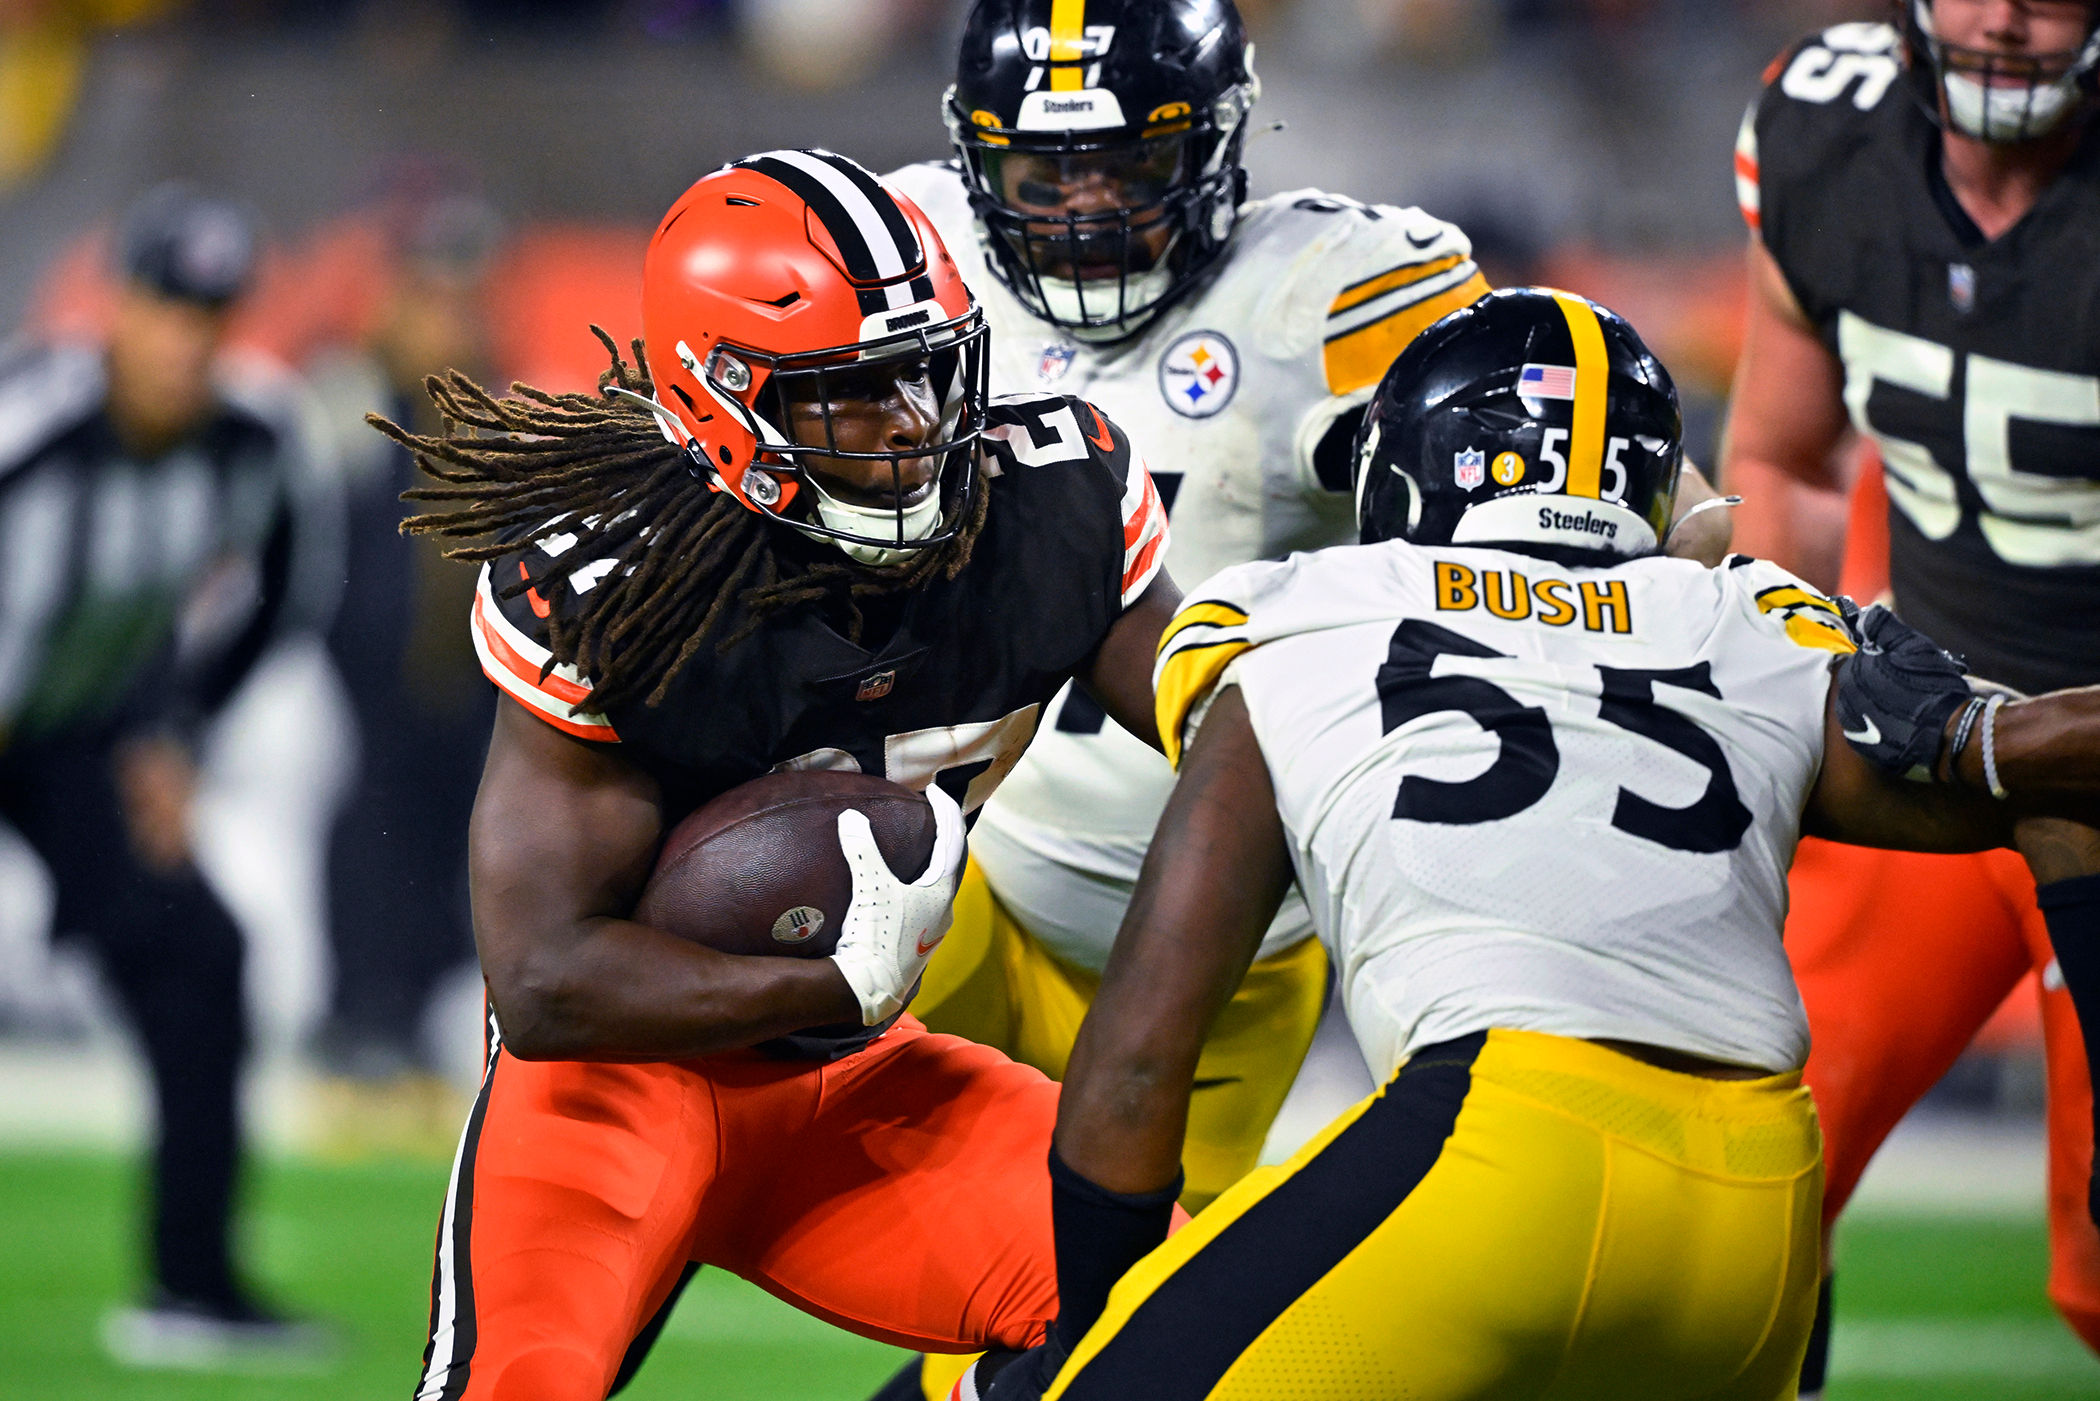 Browns vs Steelers: Swirling winds wreck havoc on kicking for both teams